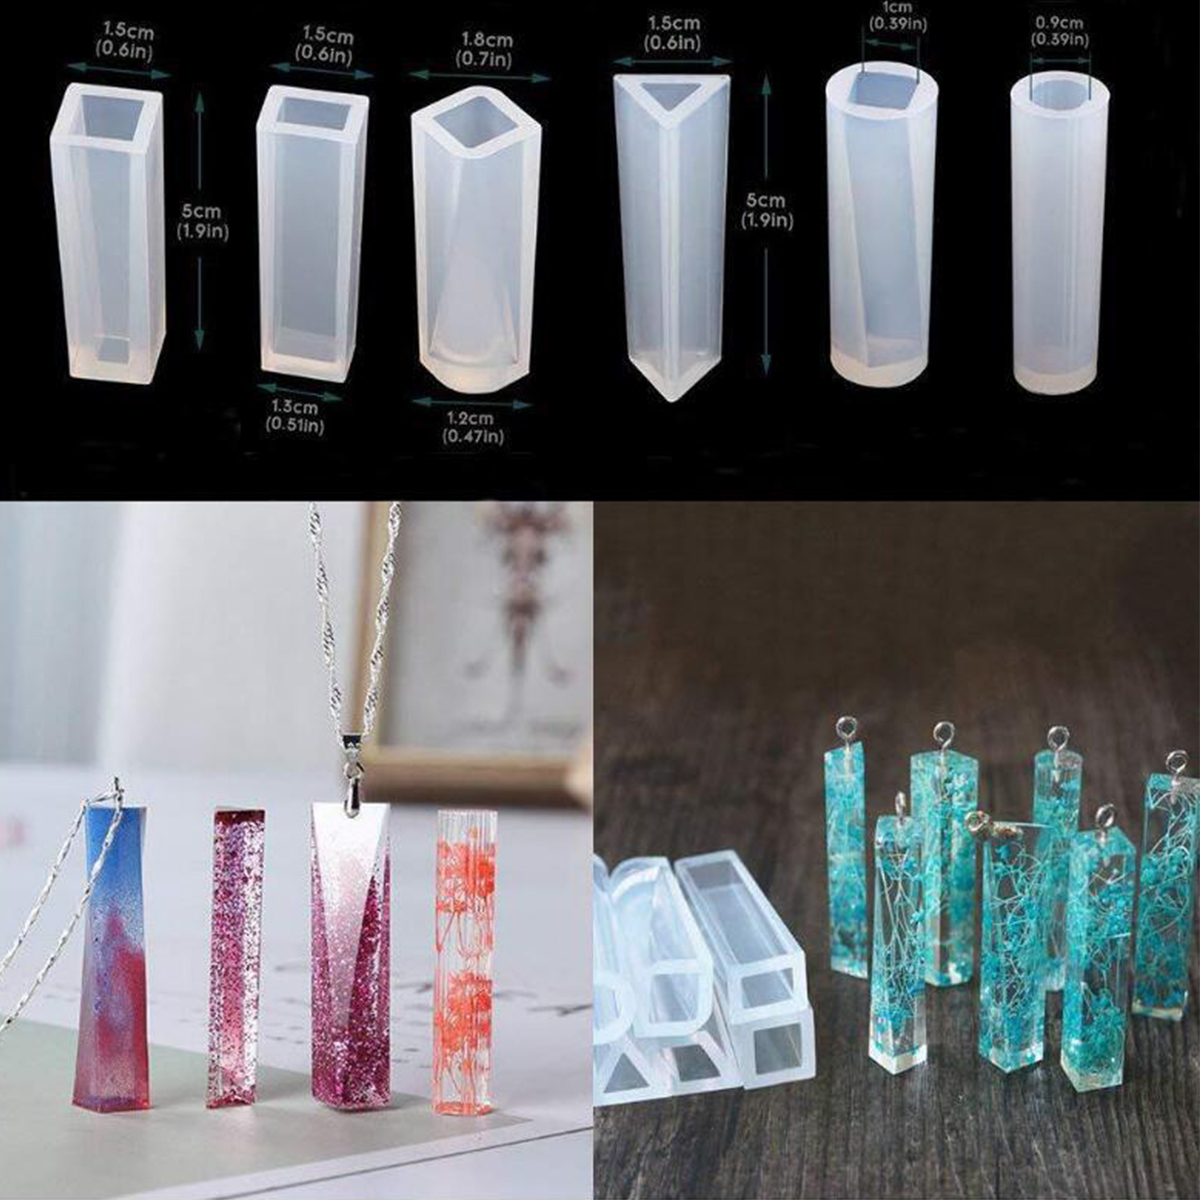 129PcsSet-Silicone-Casting-Molds-Tools-Jewelry-Pendant-Resin-Mould-DIY-1613609-2